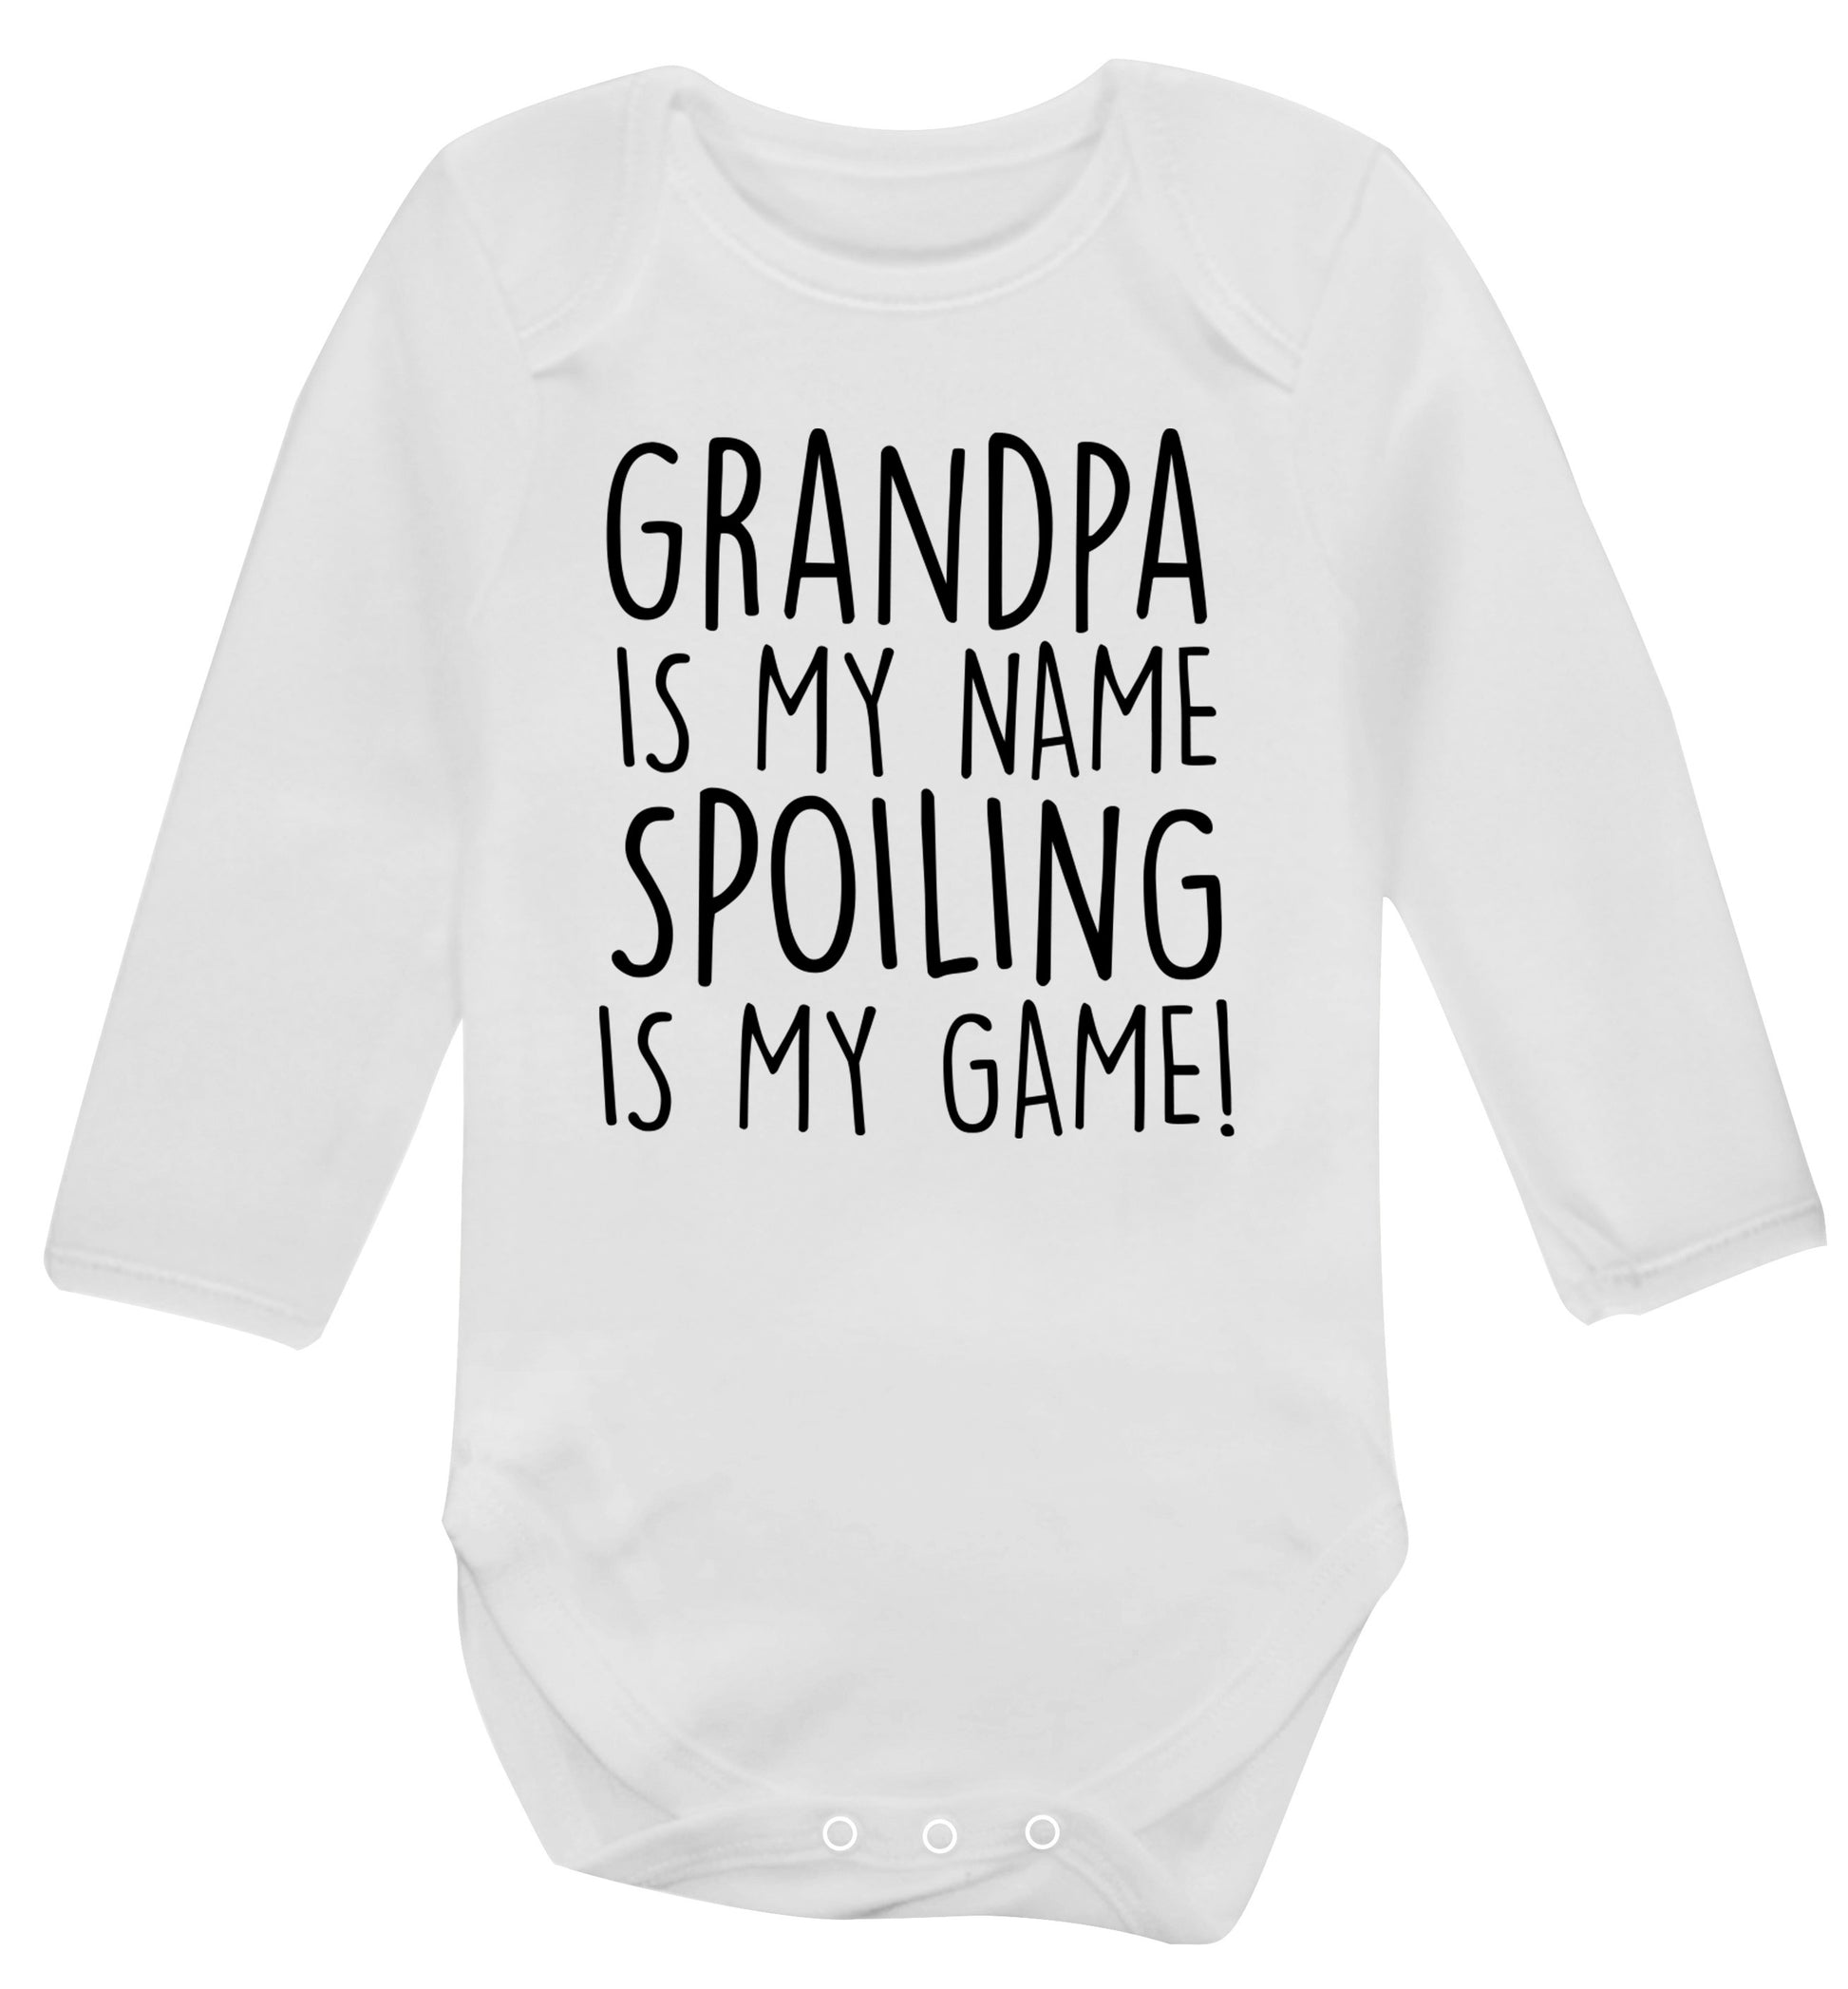 Grandpa is my name, spoiling is my game Baby Vest long sleeved white 6-12 months